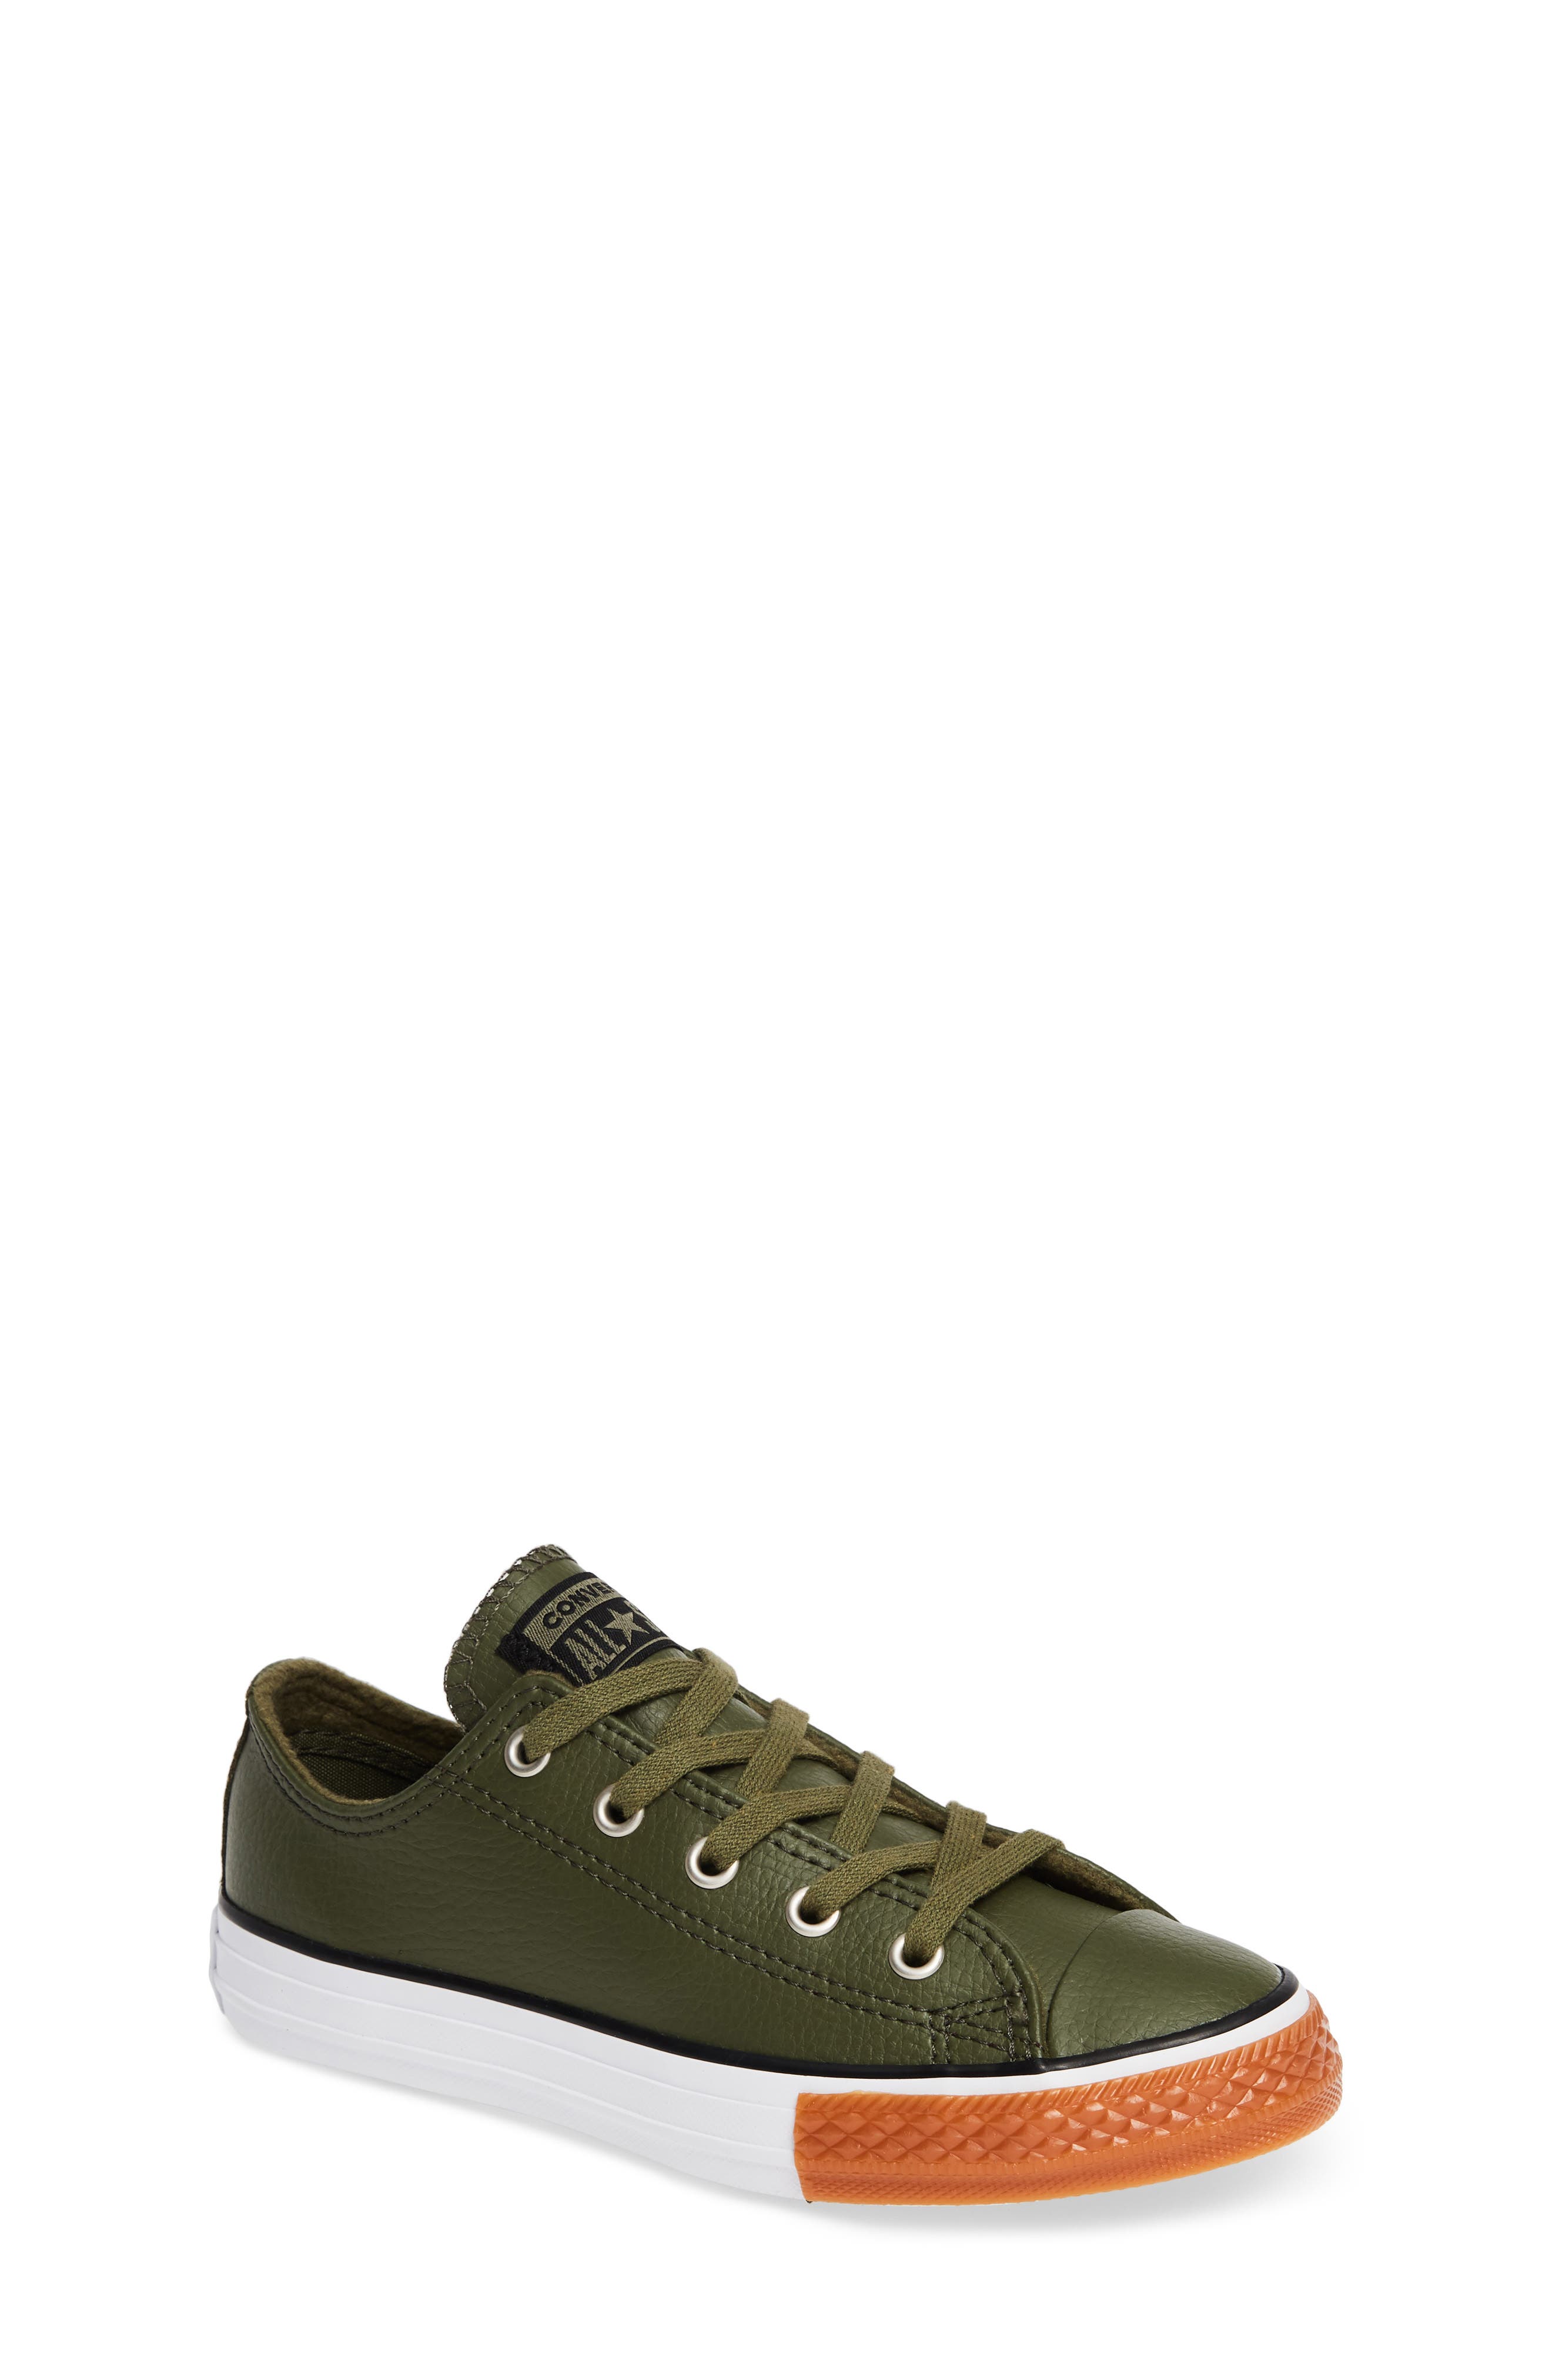 leather converse nordstrom